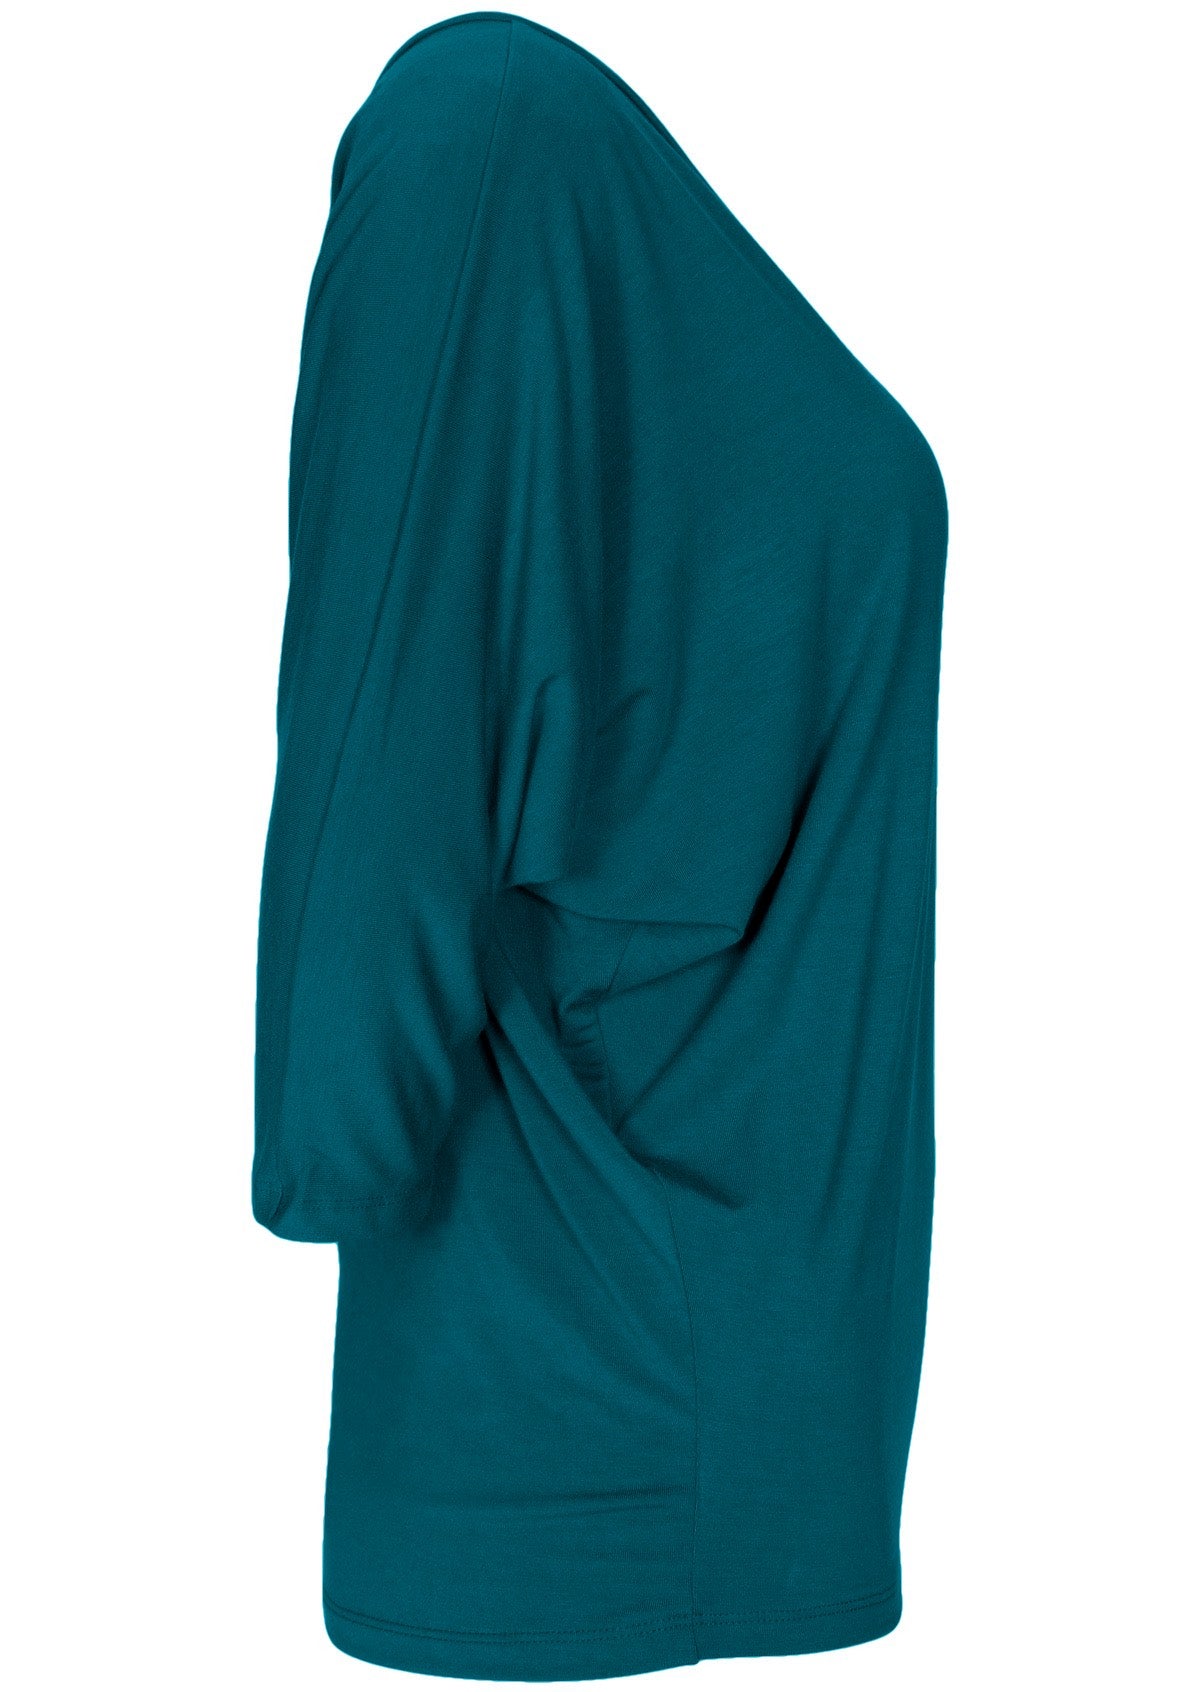 Side view of women's 3/4 sleeve rayon batwing v-neck teal top.